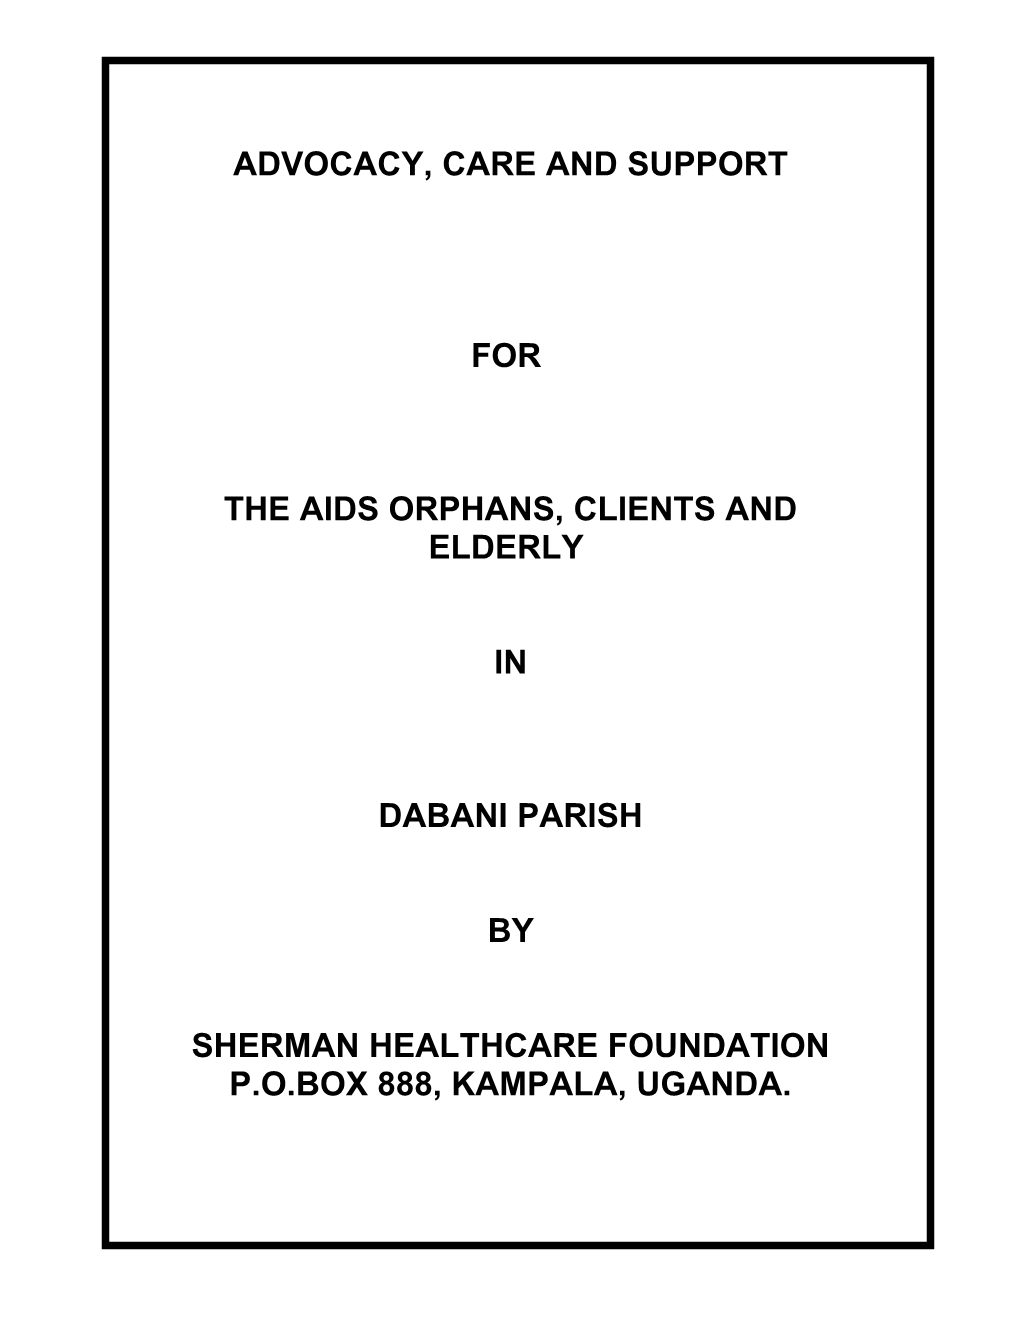 Advocacy, Care and Support